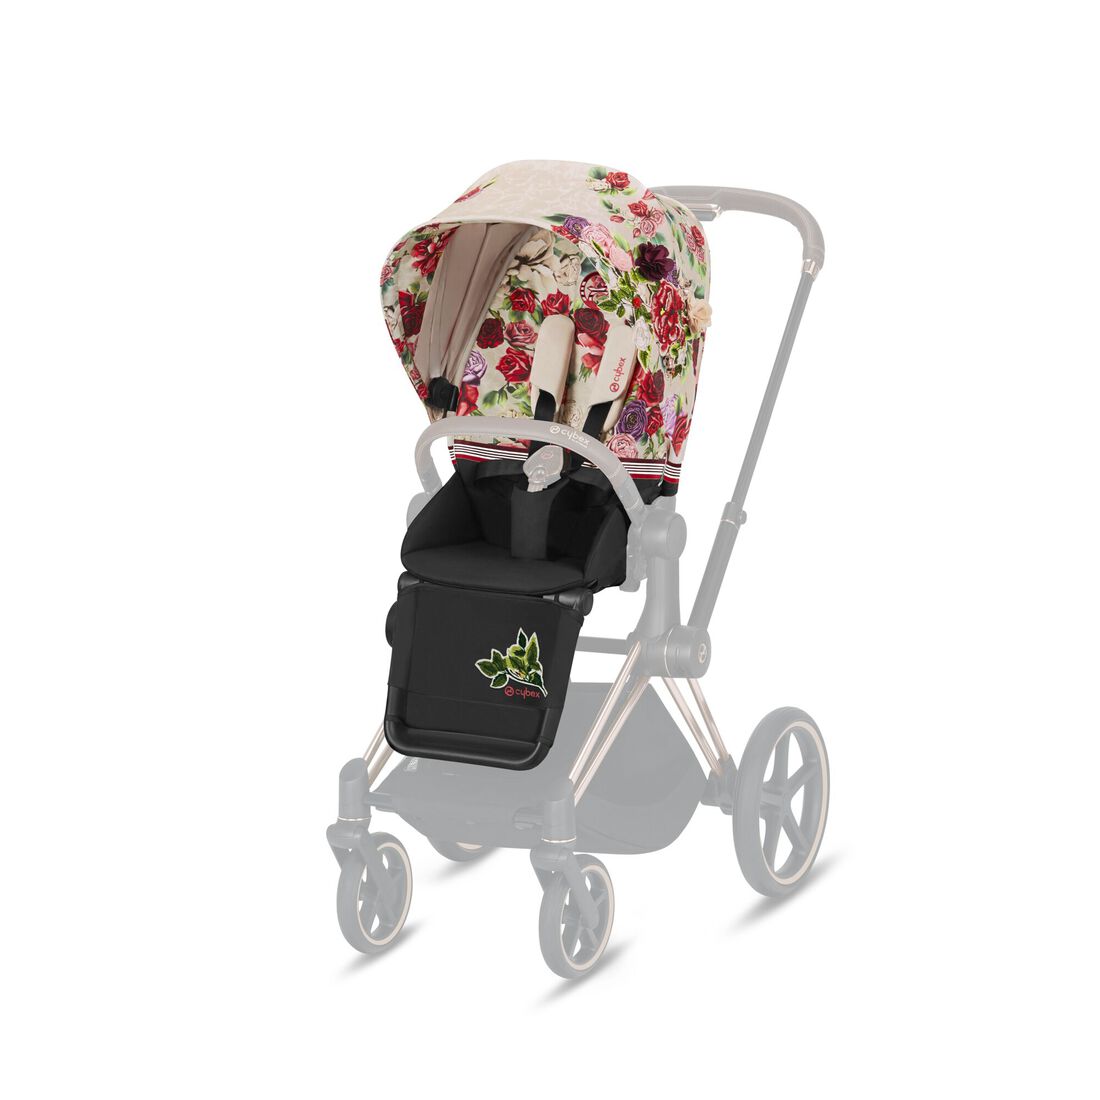 CYBEX Seat pack Priam 3 - Spring Blossom Light in Spring Blossom Light large numéro d’image 1